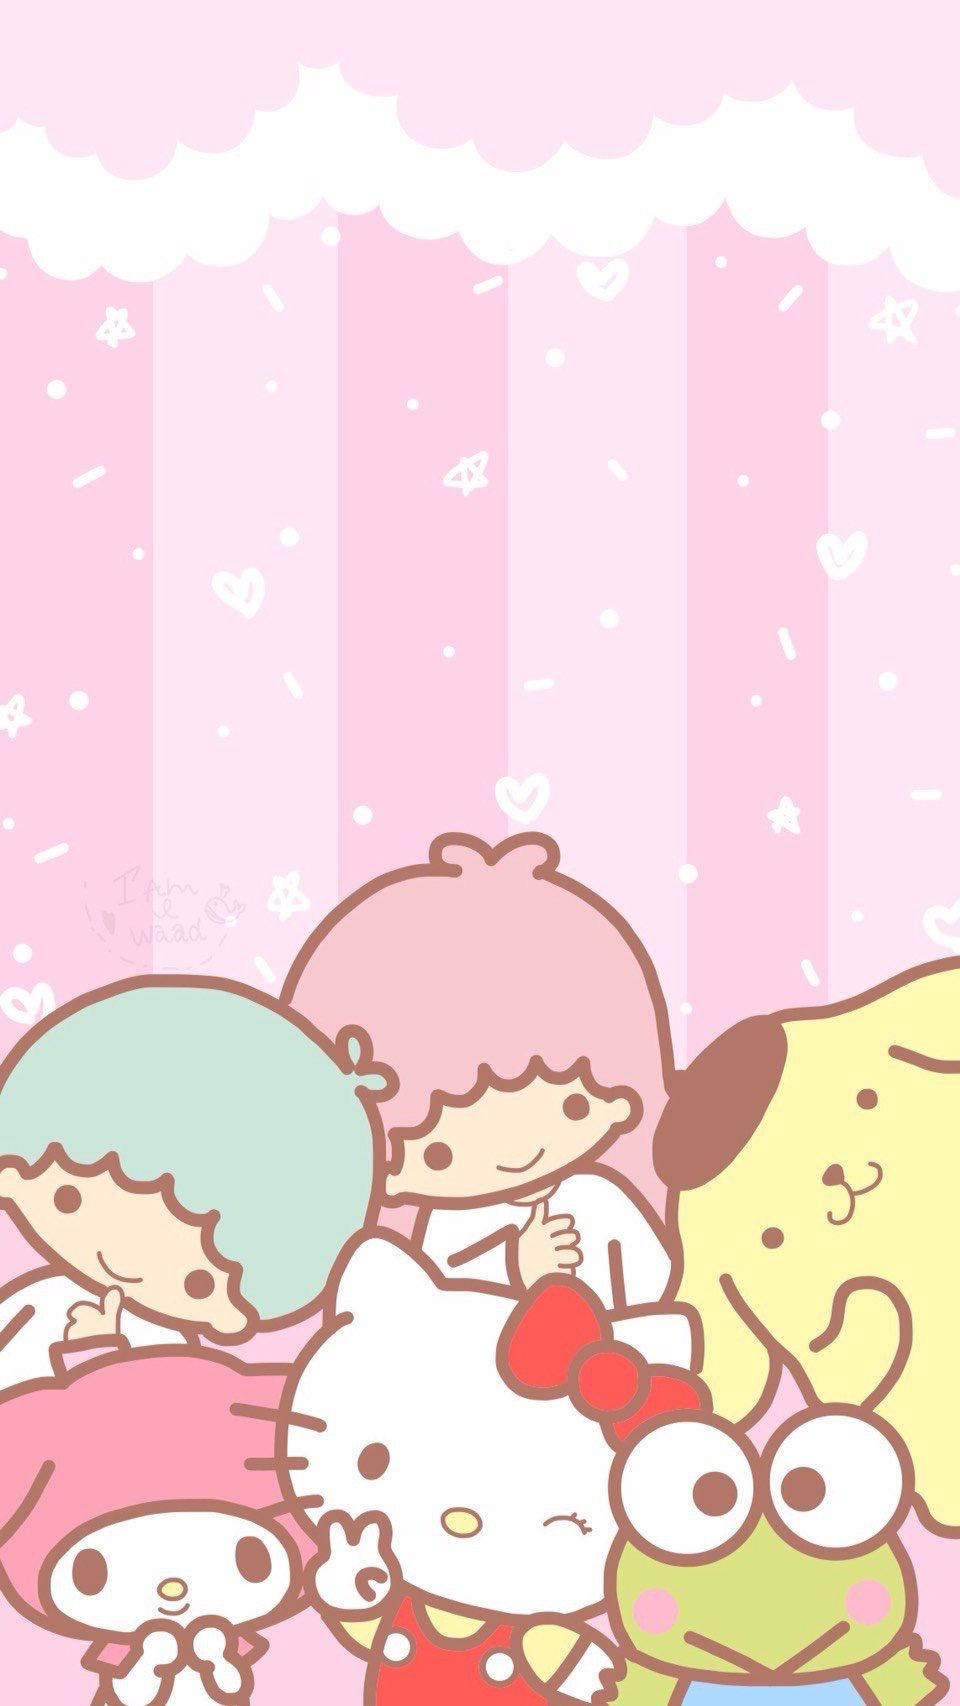 Sanrio Characters In Pink Background